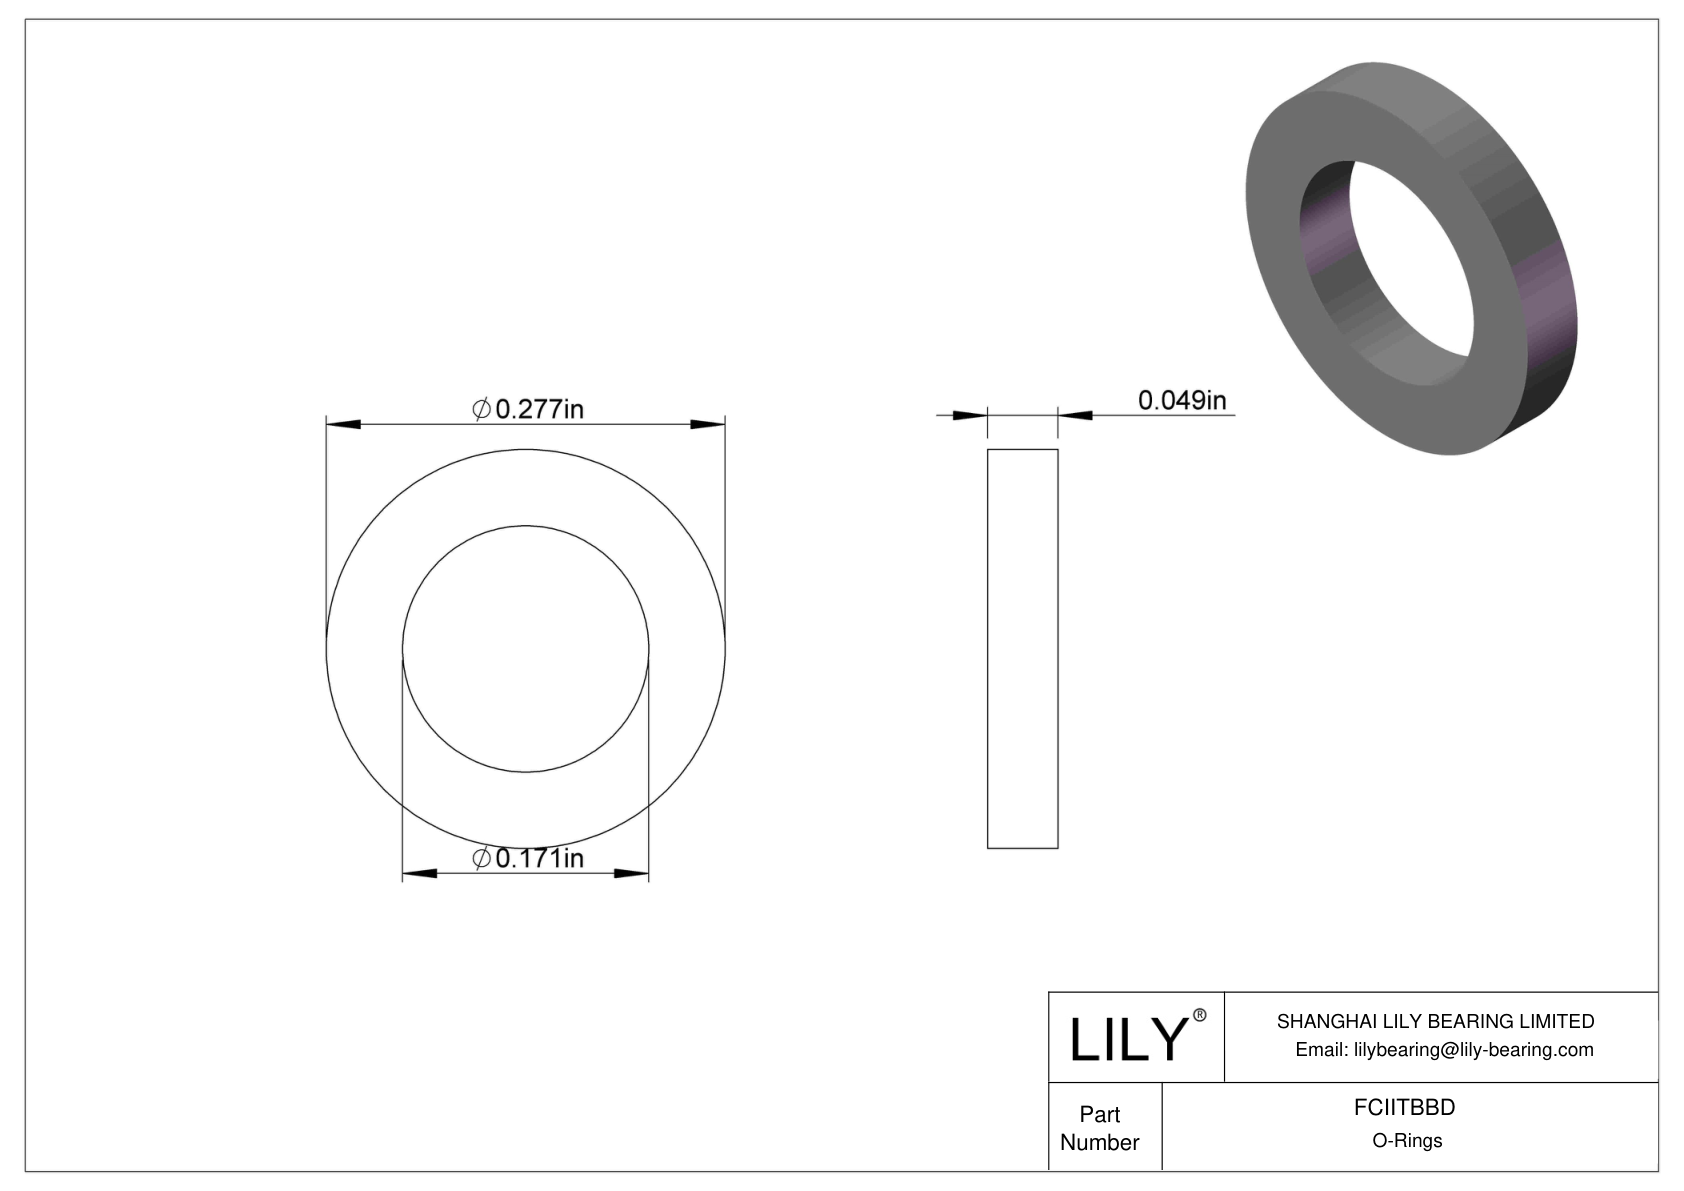 FCIITBBD O-Ring Backup Rings cad drawing